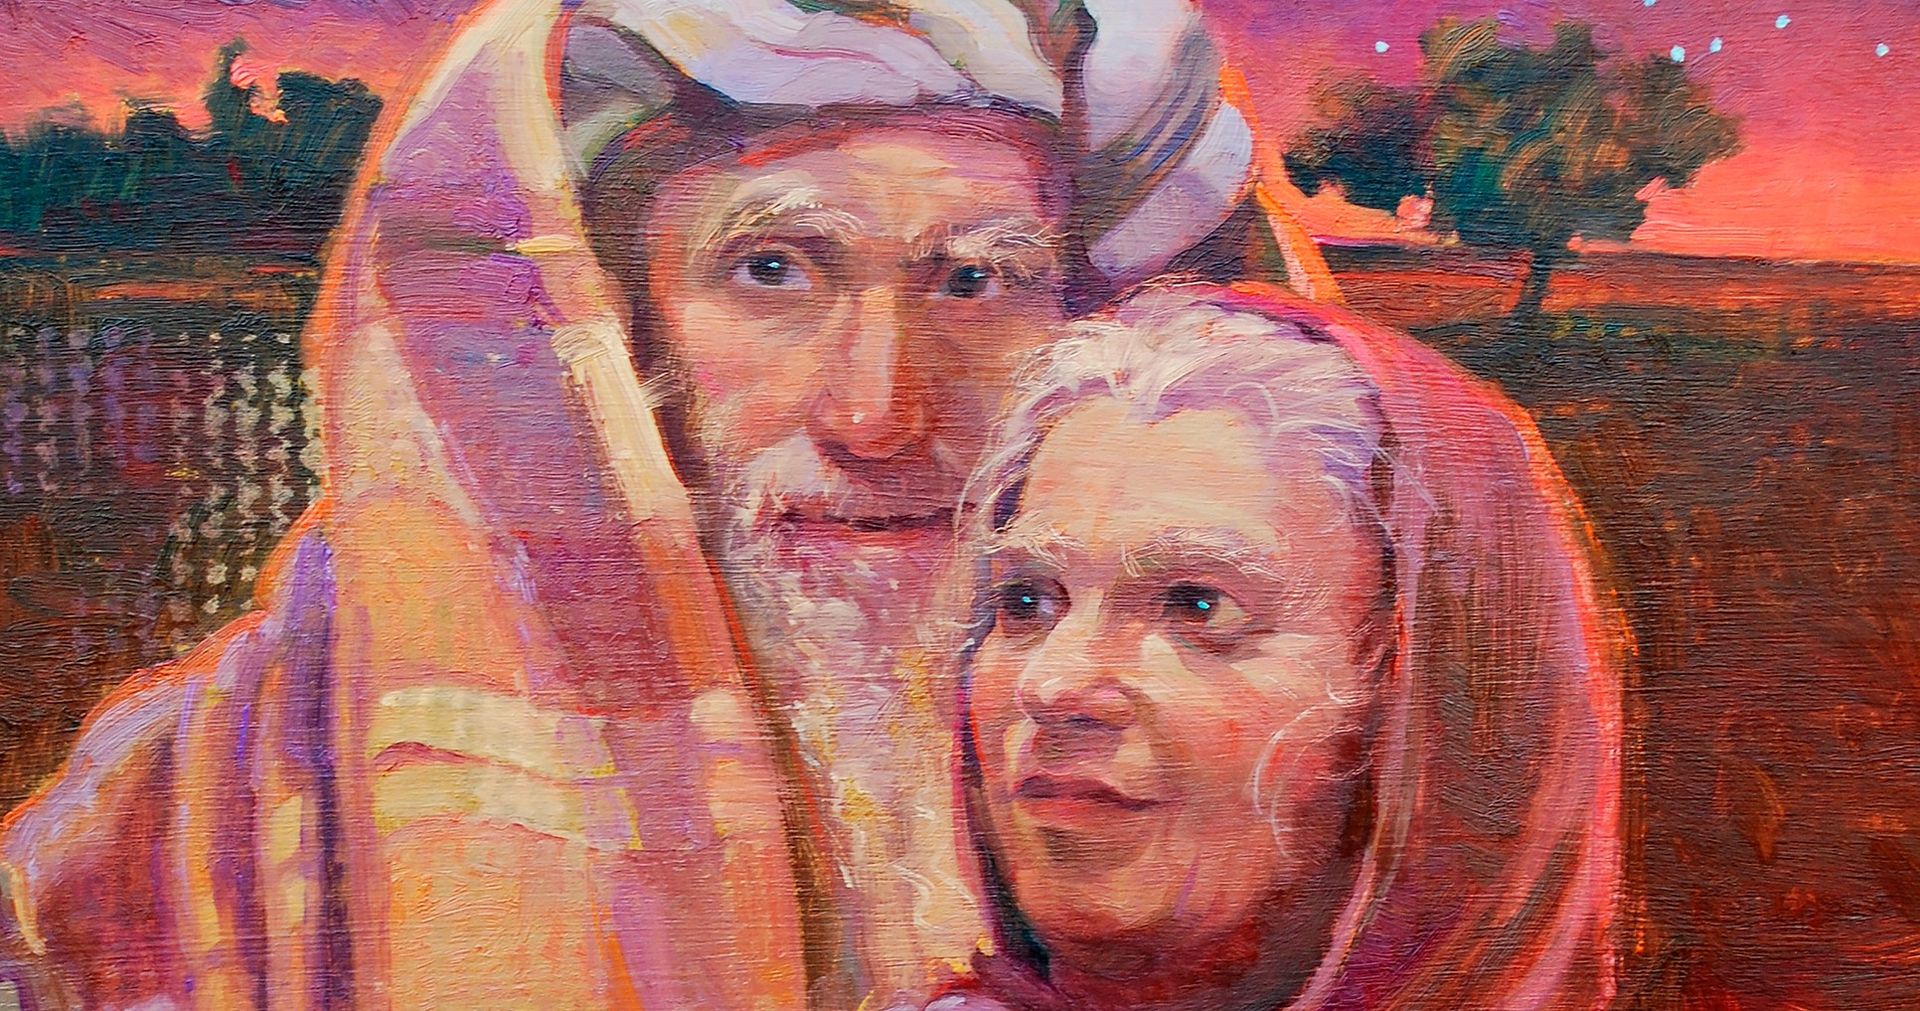 Full-color illustration of Abraham and Sarah from the Old Testament.